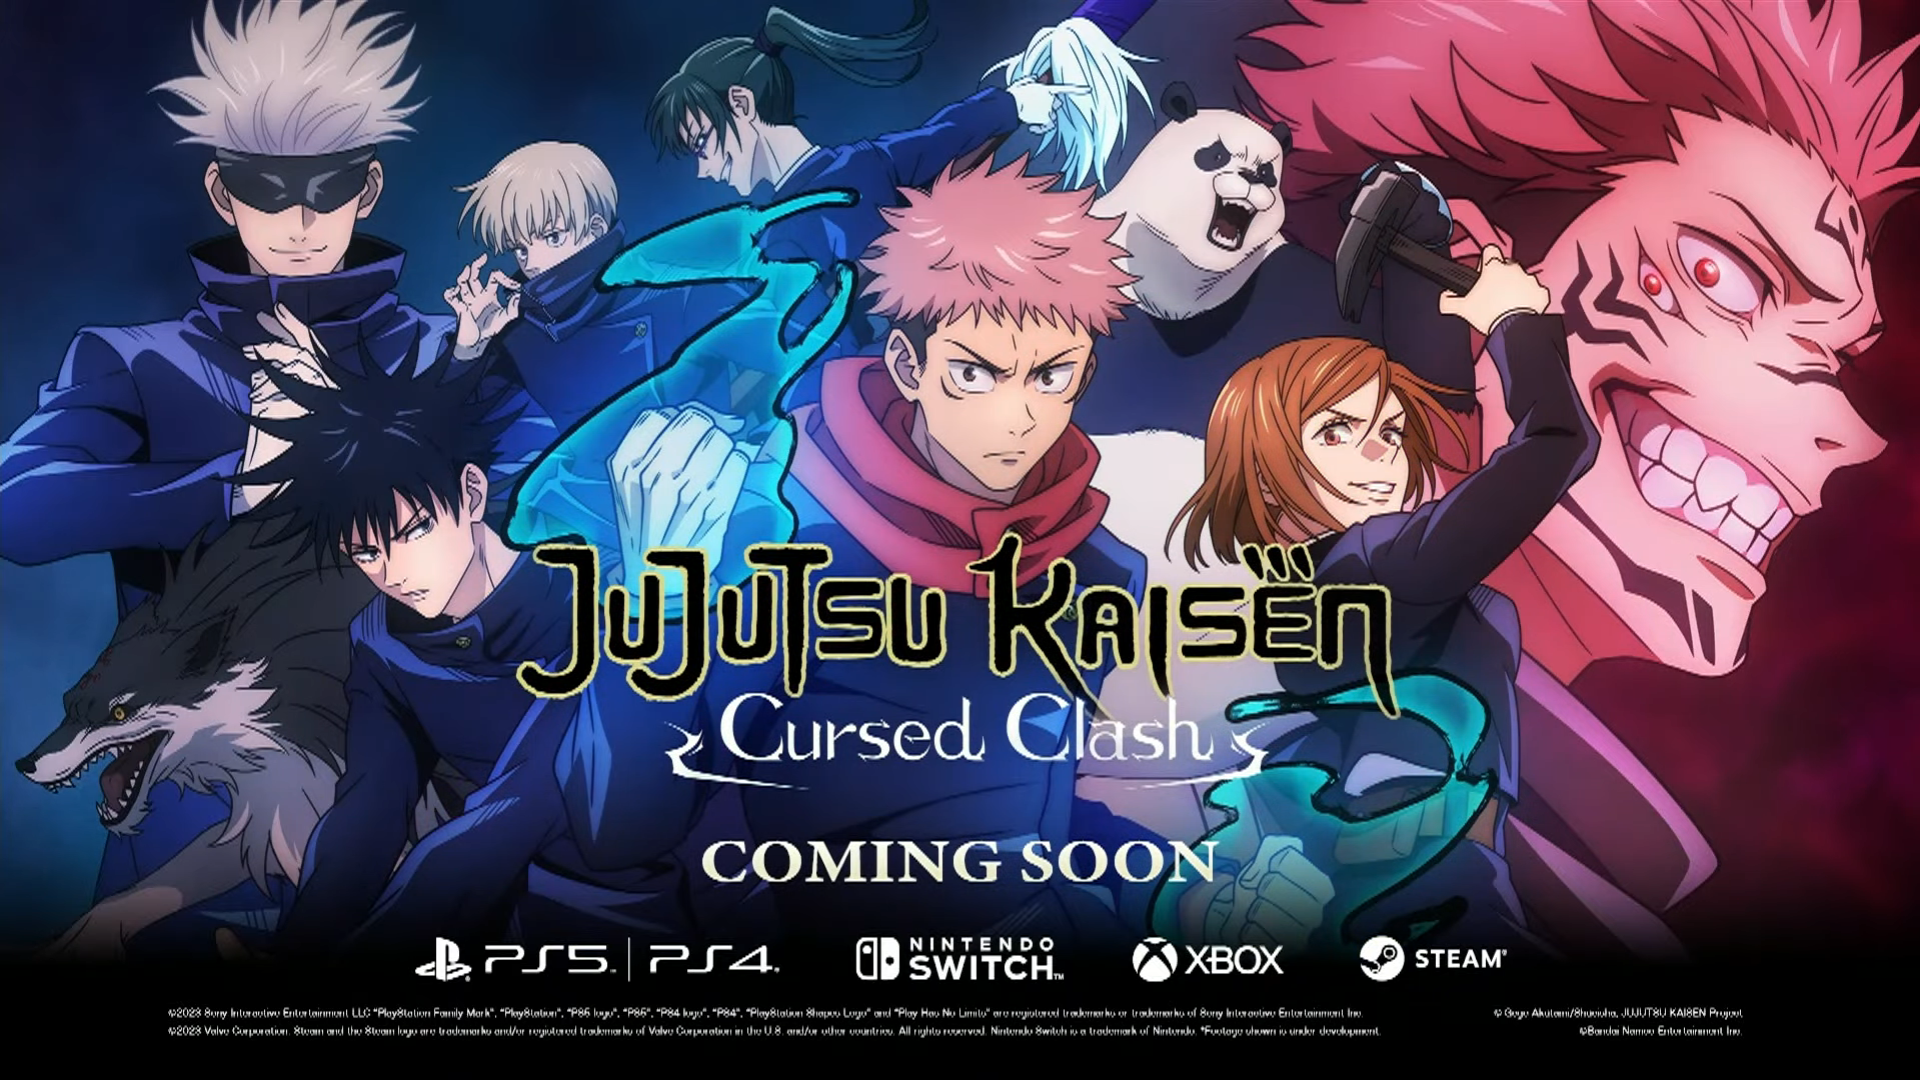 Jujutsu Kaisen Cursed Clash Announced for PS4, PS5, Xbox, Switch & PC